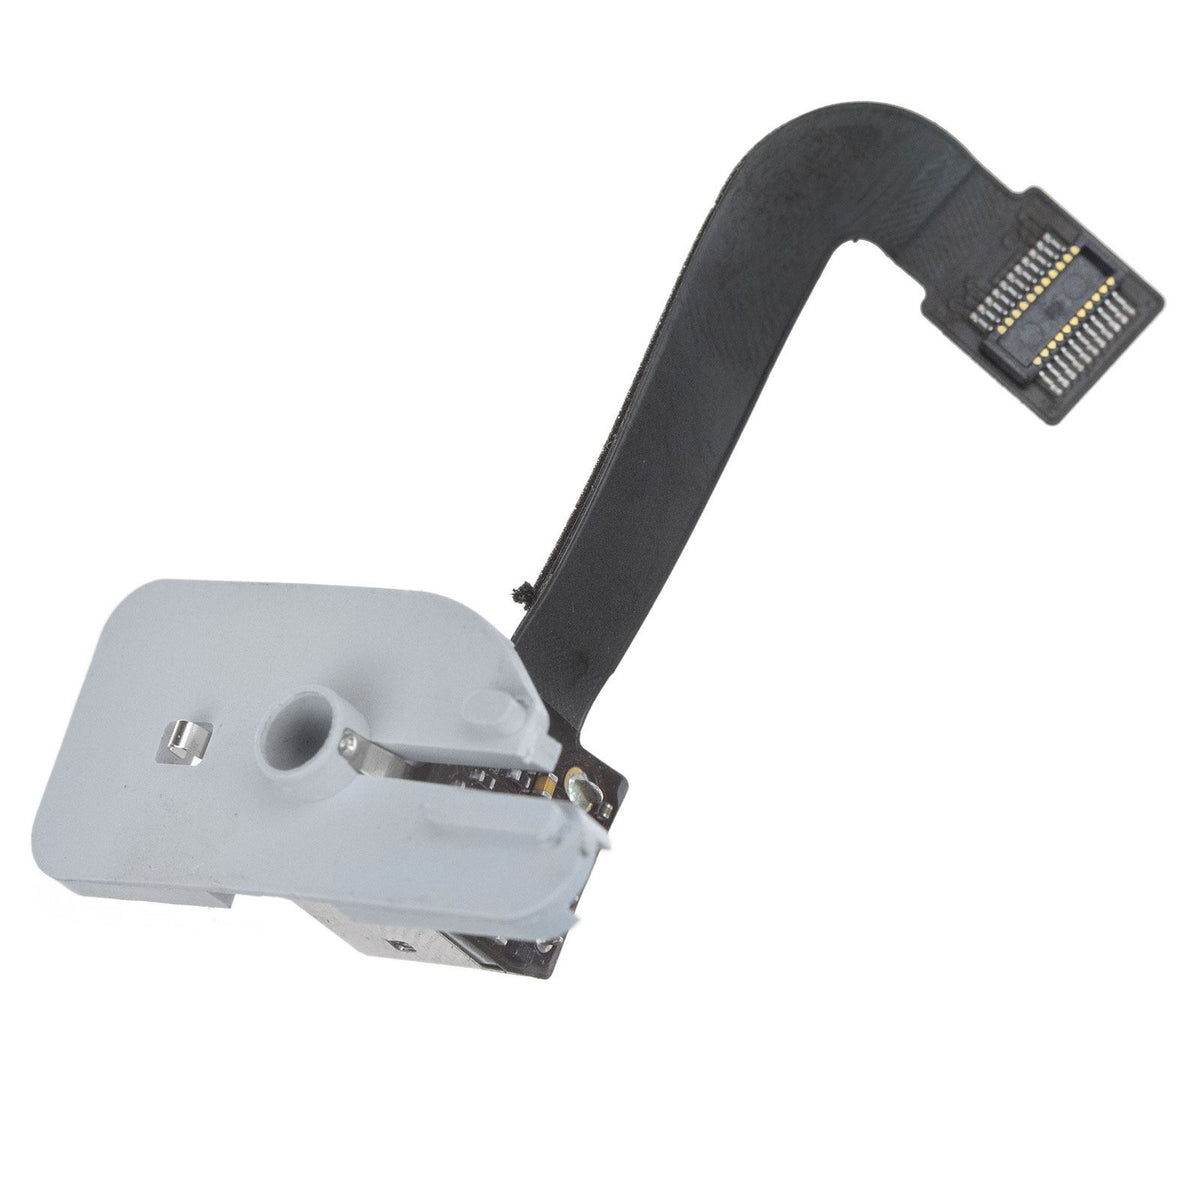 HEADPHONE JACK FLEX CABLE FOR IMAC 21.5" A1418 (LATE 2012, MID 2014)